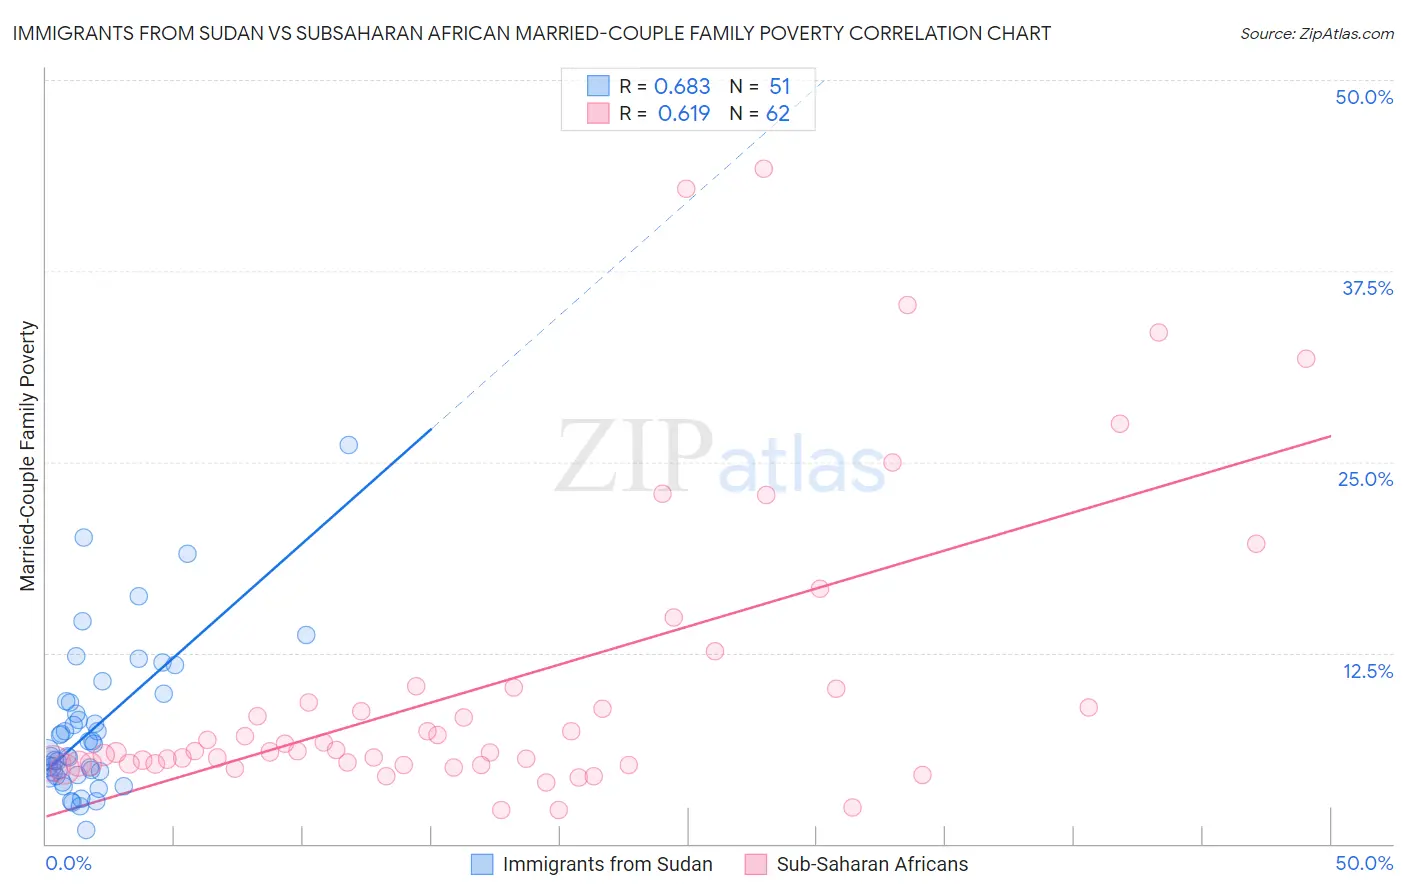 Immigrants from Sudan vs Subsaharan African Married-Couple Family Poverty